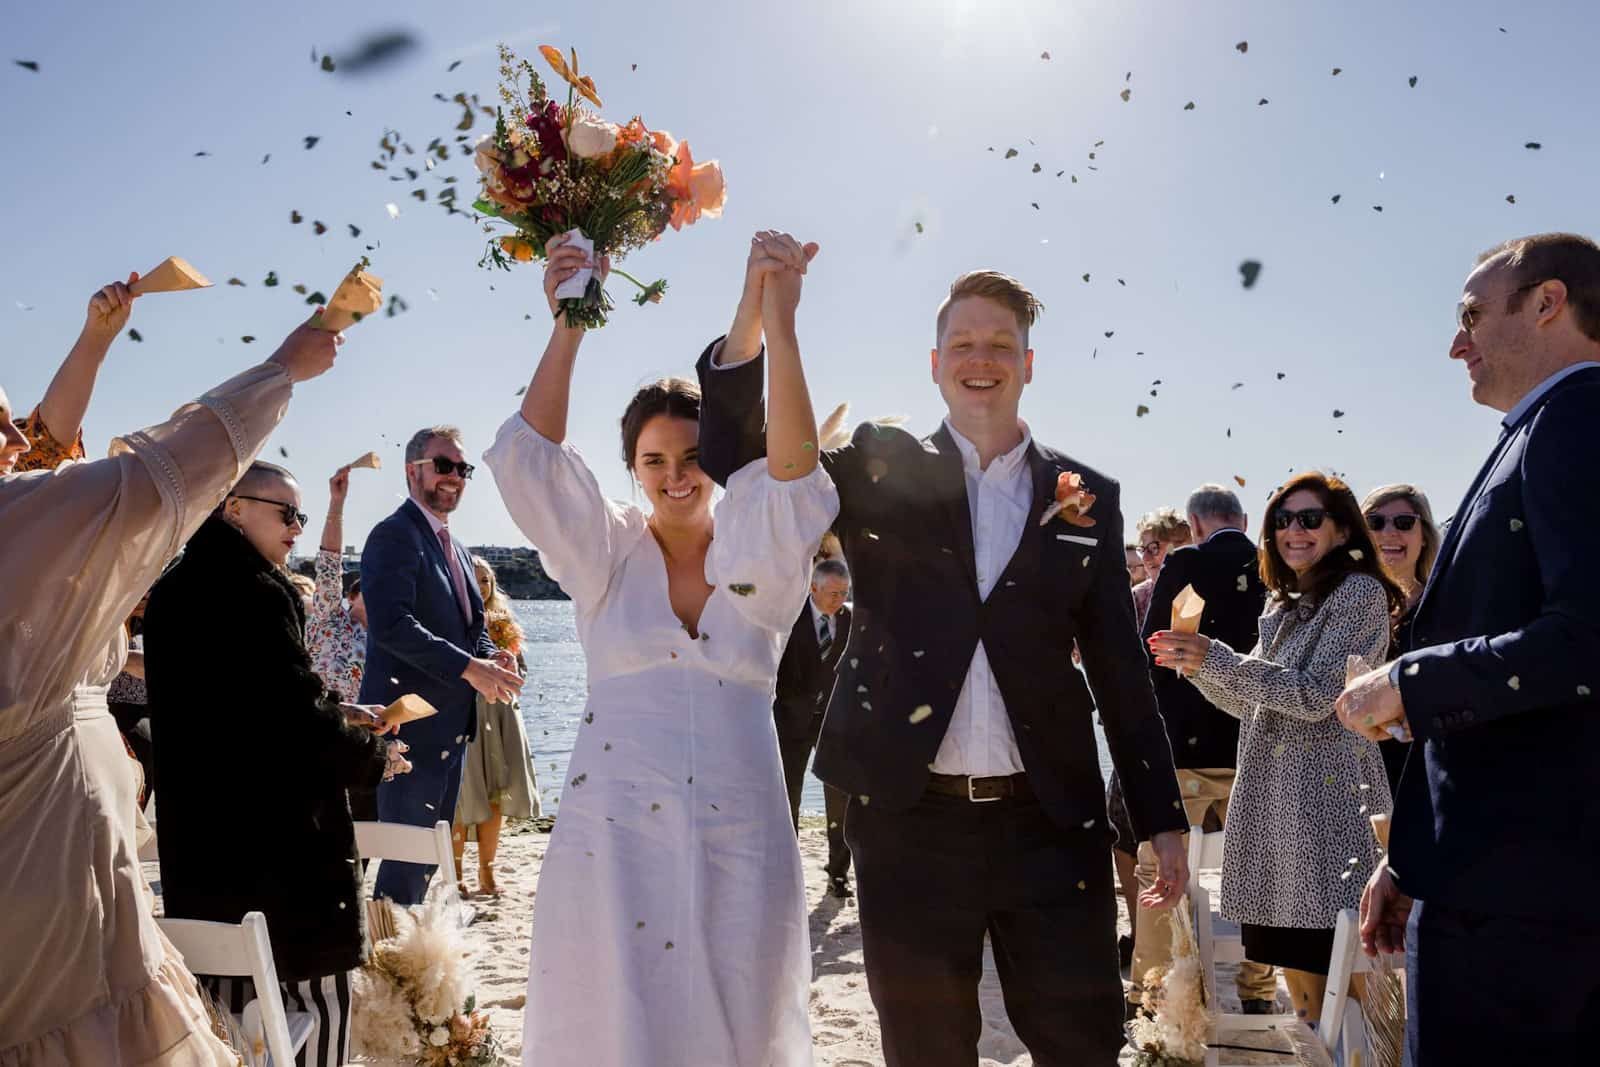 newly married couple celebrate with hands in the air as they walk down the aisle as guests throw confetti